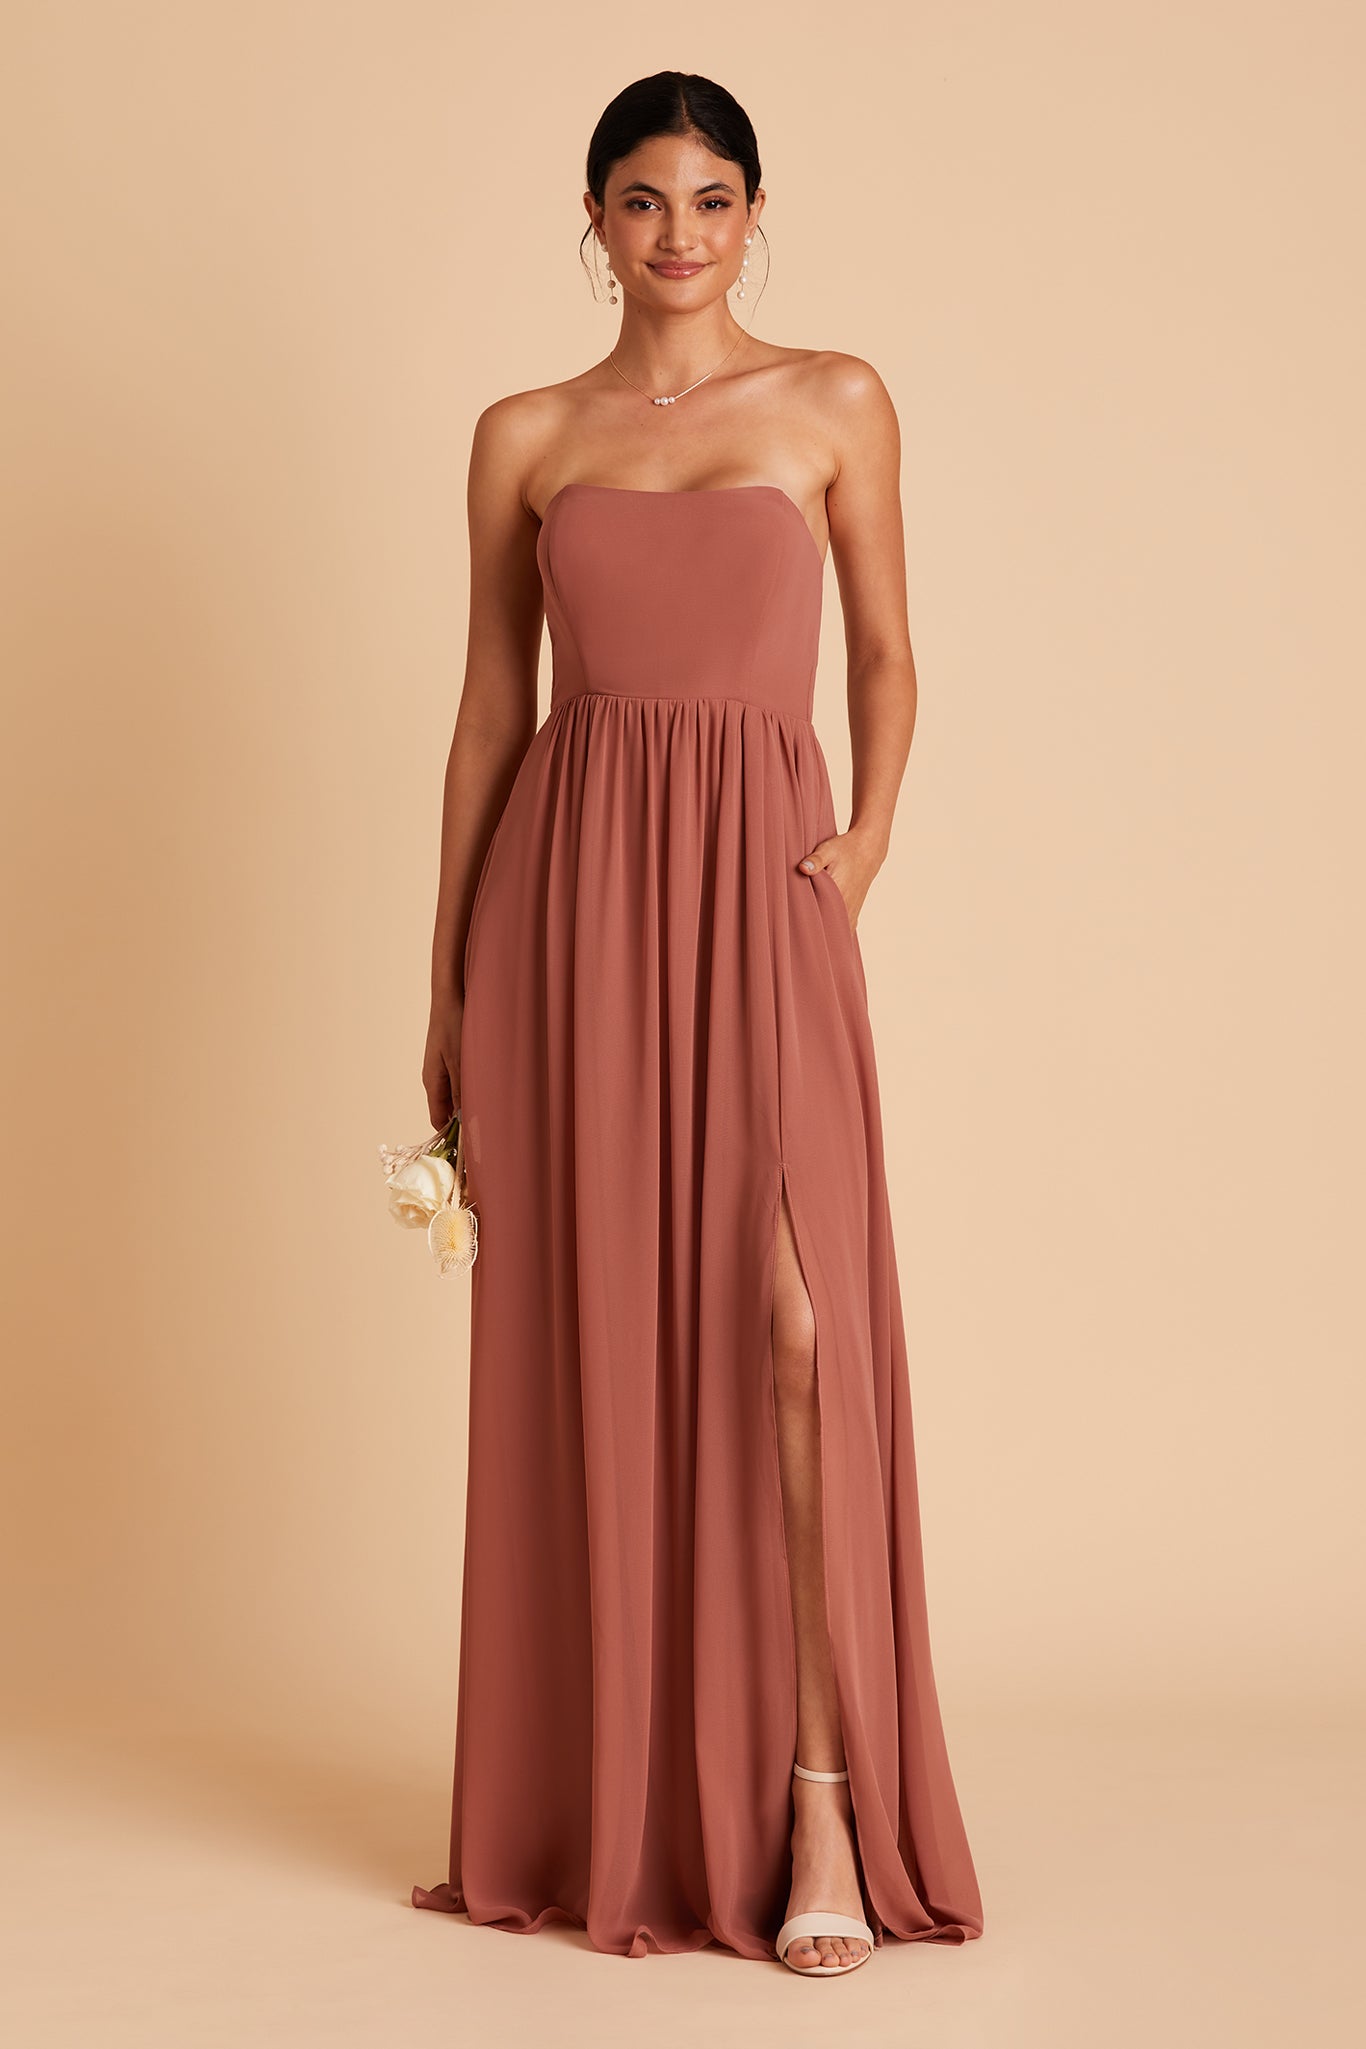 August bridesmaid dress with slit in desert rose chiffon by Birdy Grey, front view